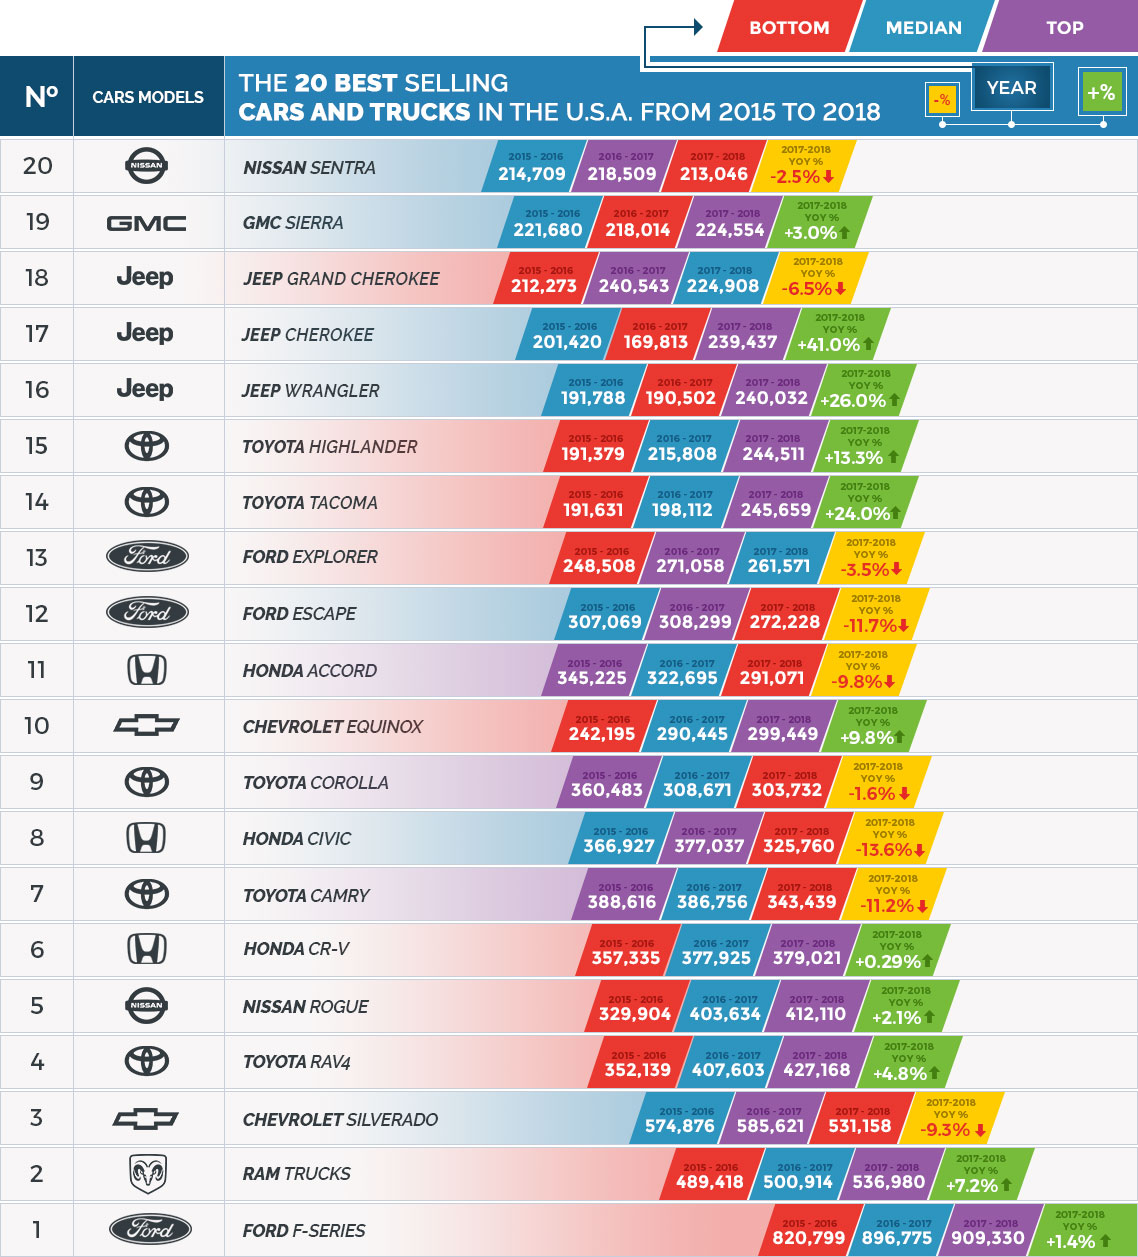 The 20 Best Selling Cars and Trucks in the U.S.A. Year-over-Year Comparisons